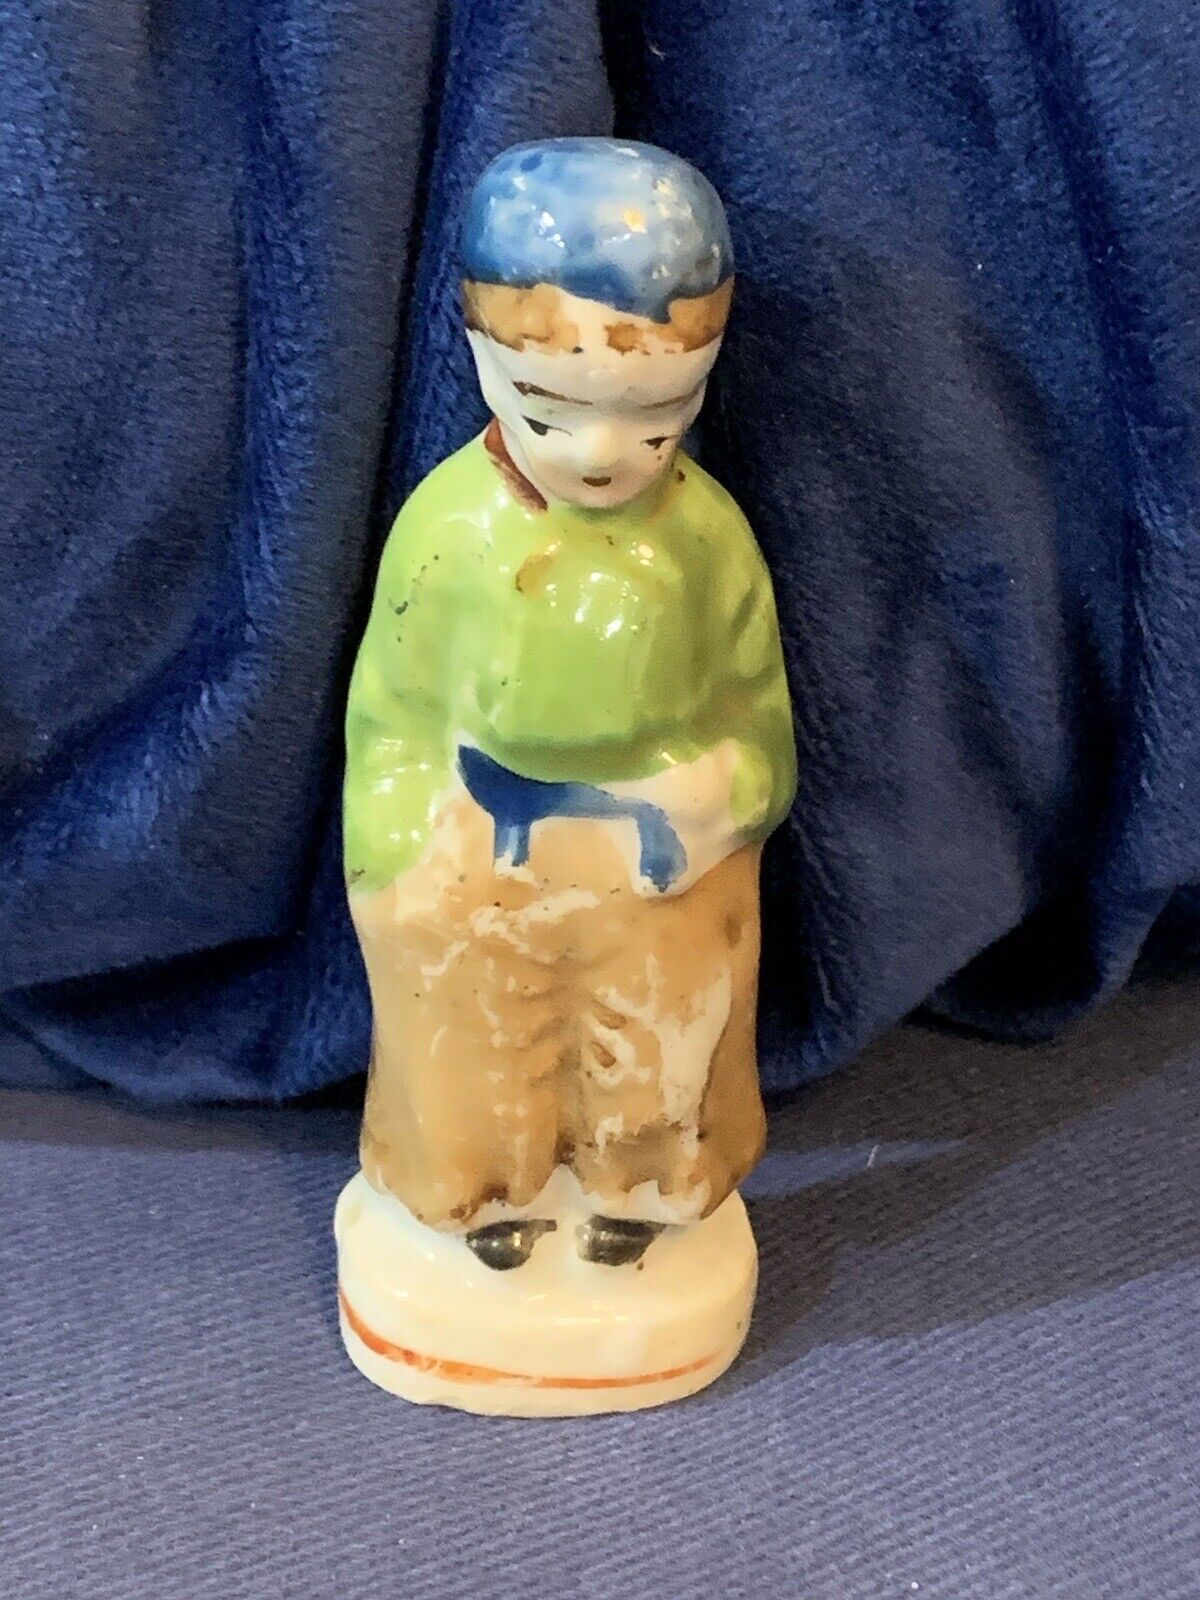 Vintage Bisque Doll Japan Miniature Small Tiny Penny Figurine 3”